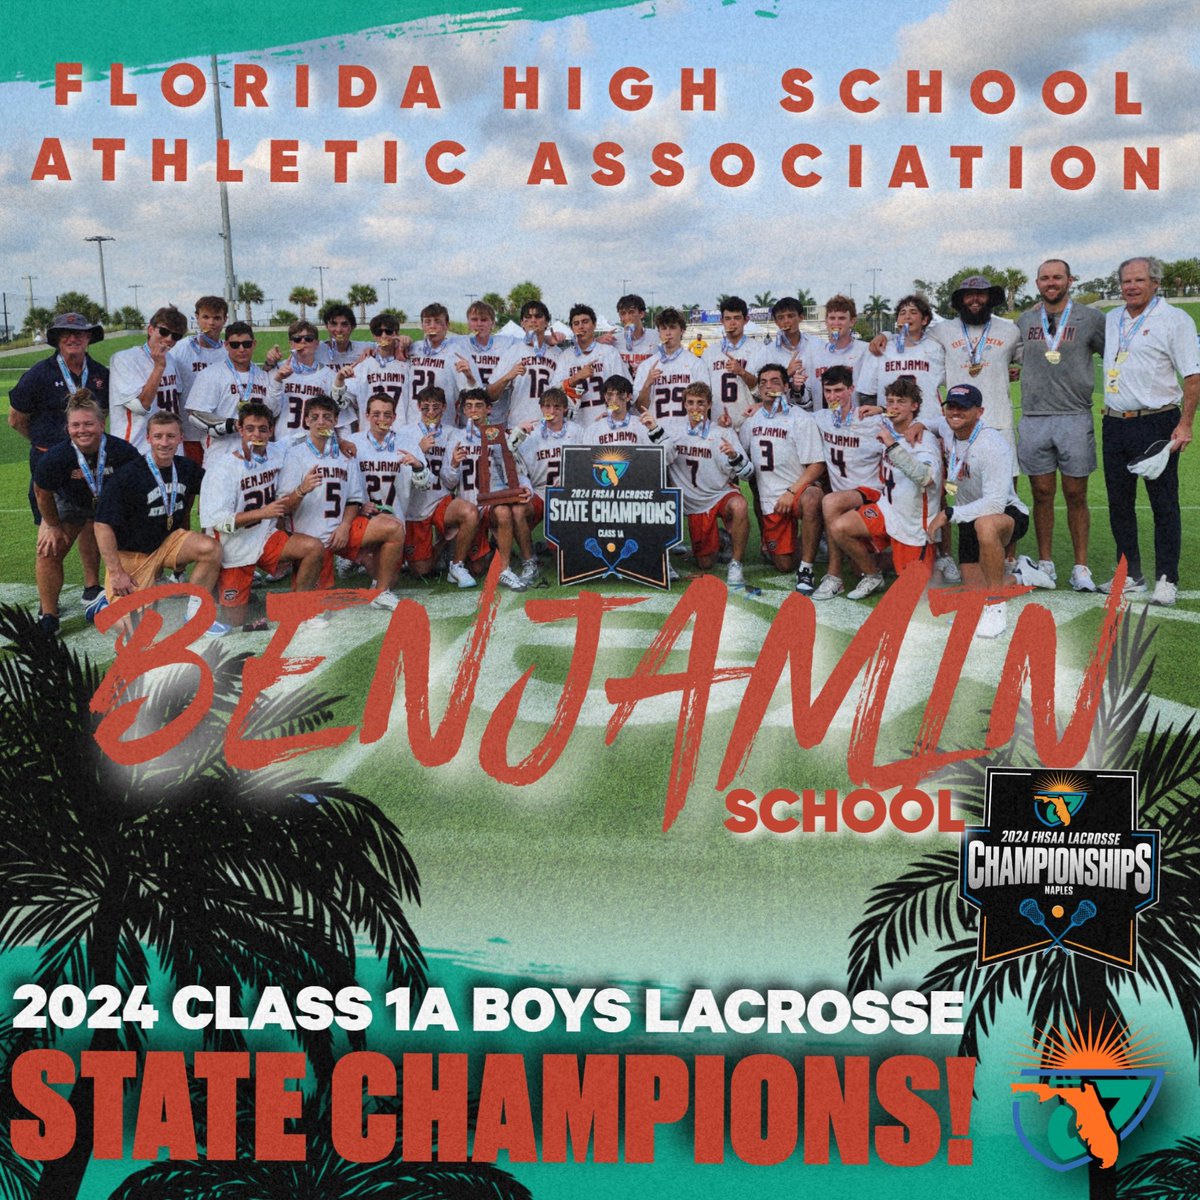 Congratulations to the brand new Class 1A Boys Lacrosse State Champions 🏆 The Benjamin School! Winners with a score of 11-10!